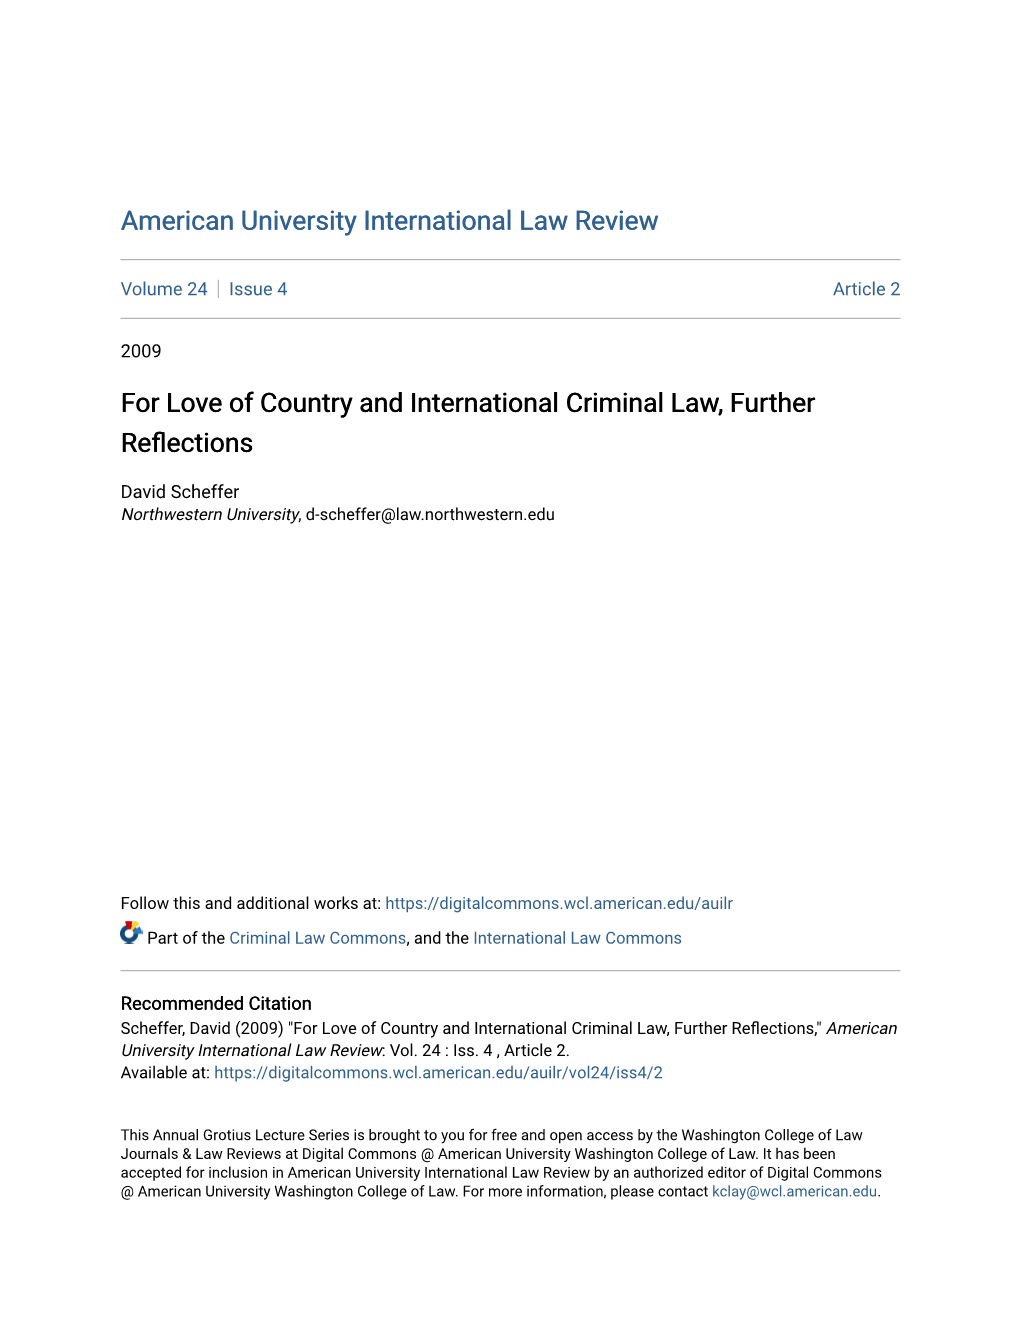 For Love of Country and International Criminal Law, Further Reflections